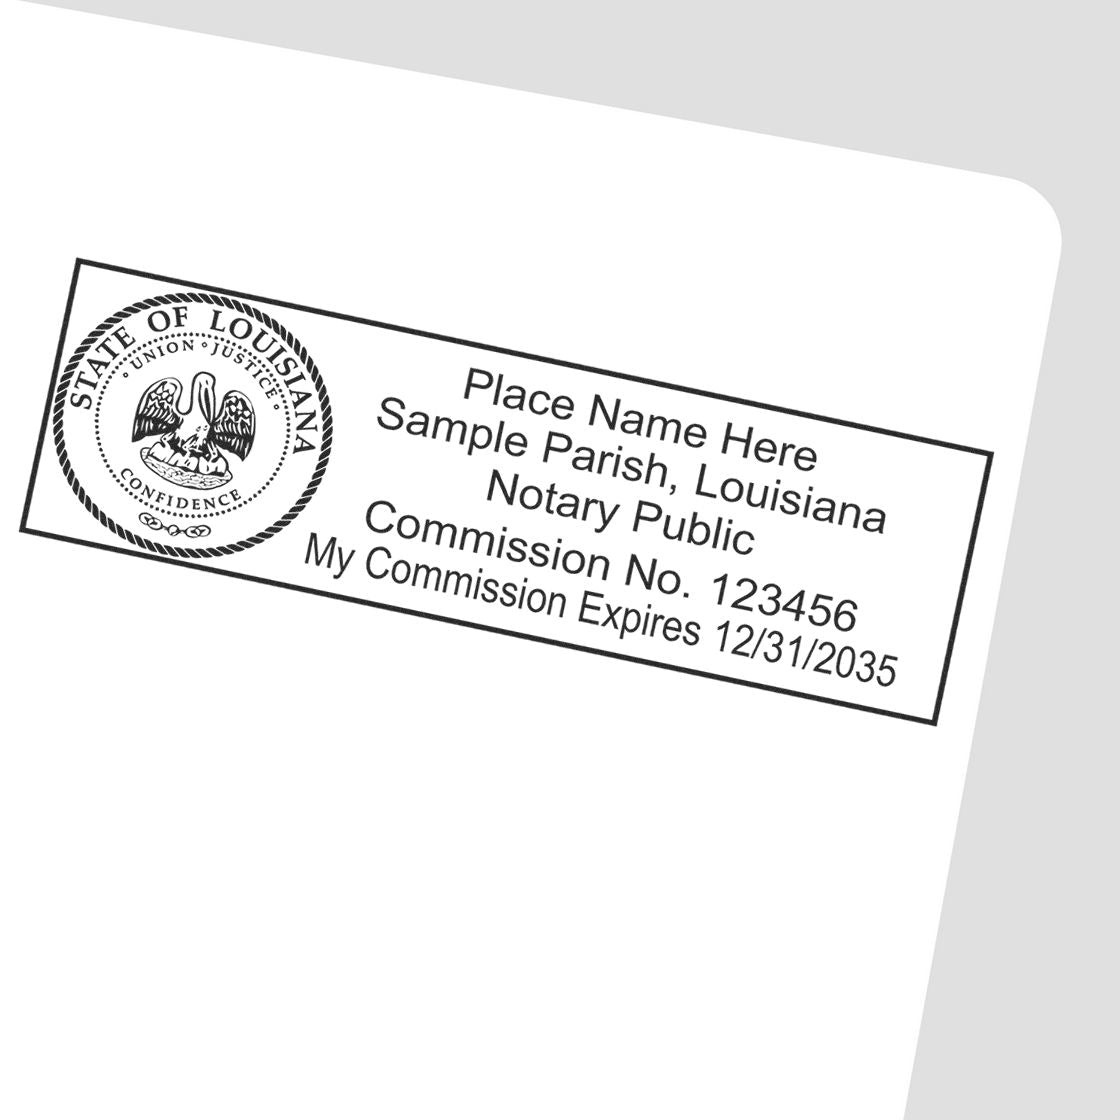 The Super Slim Louisiana Notary Public Stamp stamp impression comes to life with a crisp, detailed photo on paper - showcasing true professional quality.